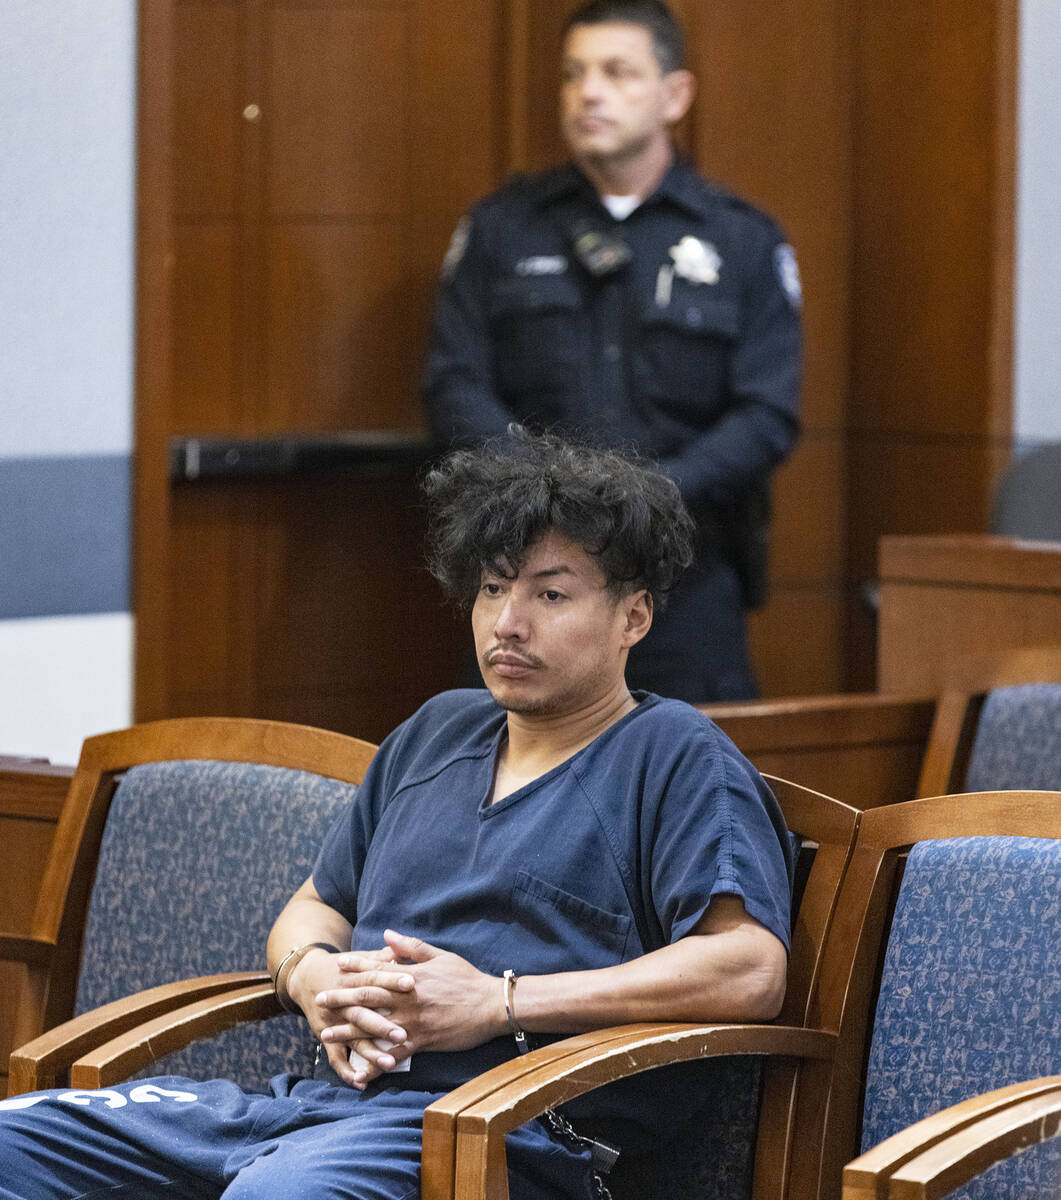 Yoni Barrios appears in court during a status check on the filing of a criminal complaint at th ...